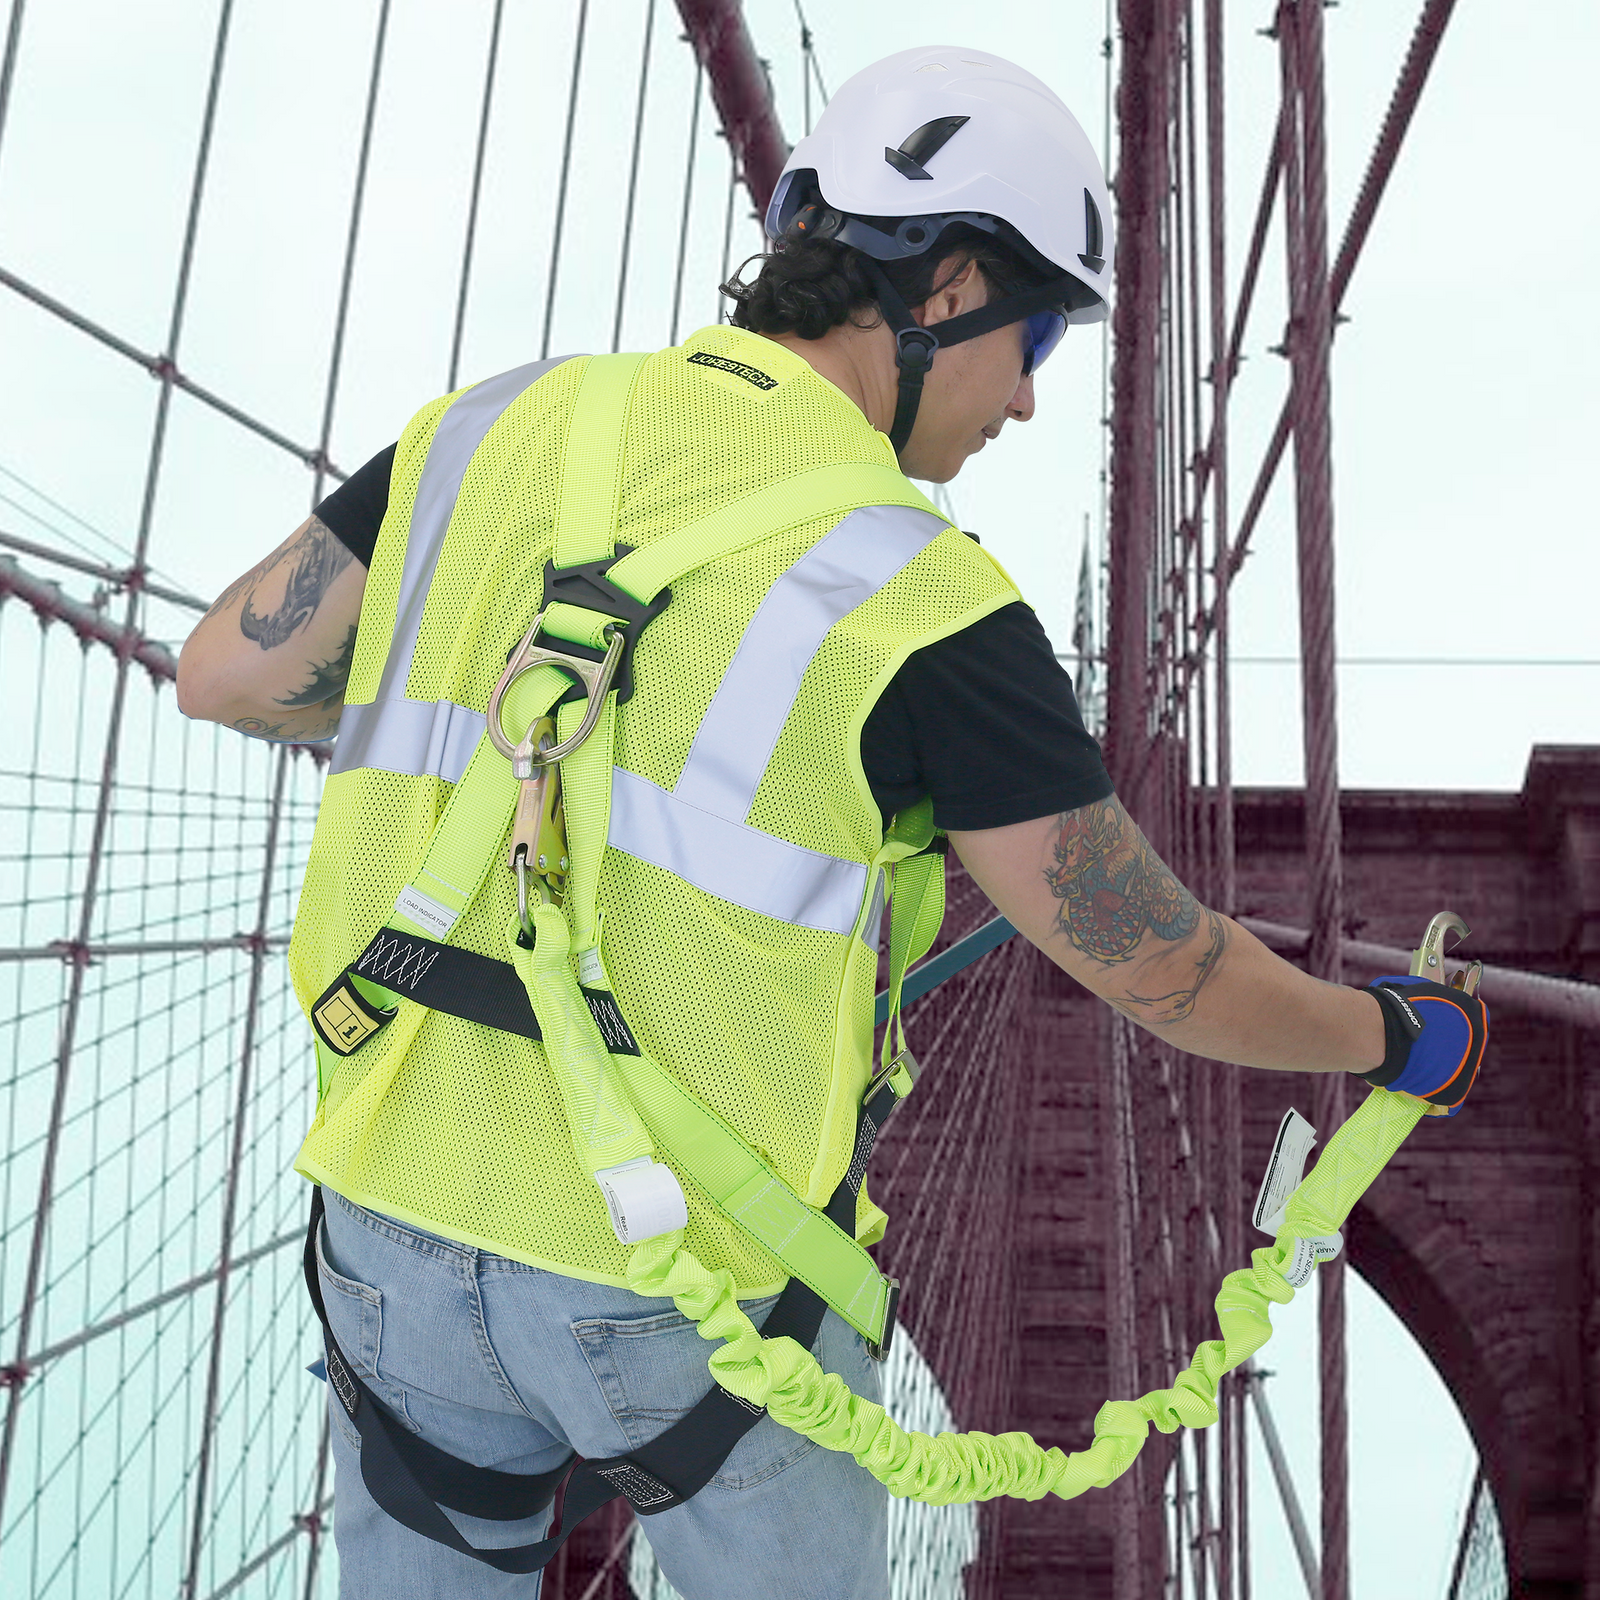 A worker wearing a white hard hat with chin strap and a harness with a single leg internal shock absorbing lanyard hooked to the D ring of the harness. He is securing himself to a stable part of the structure of a bridge while during maintenance or repairs at a very high altitud